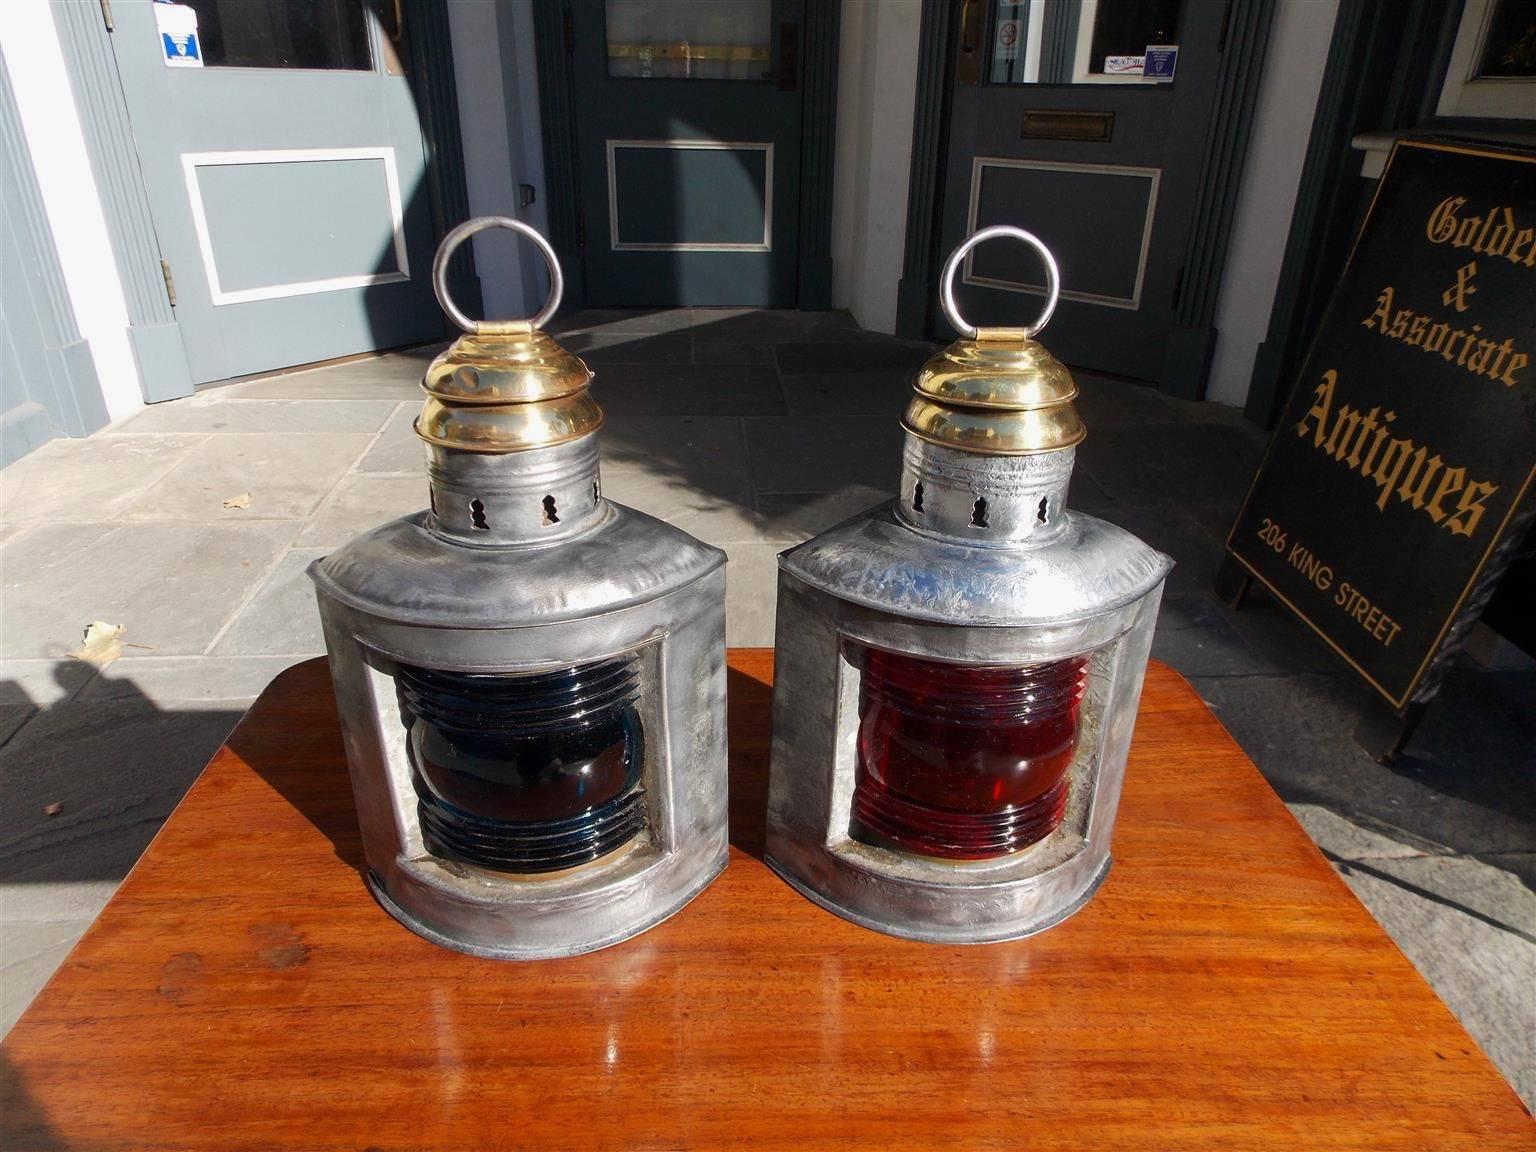 American Empire Pair of American Polished Steel and Brass Nautical Ship Lanterns. Circa 1880